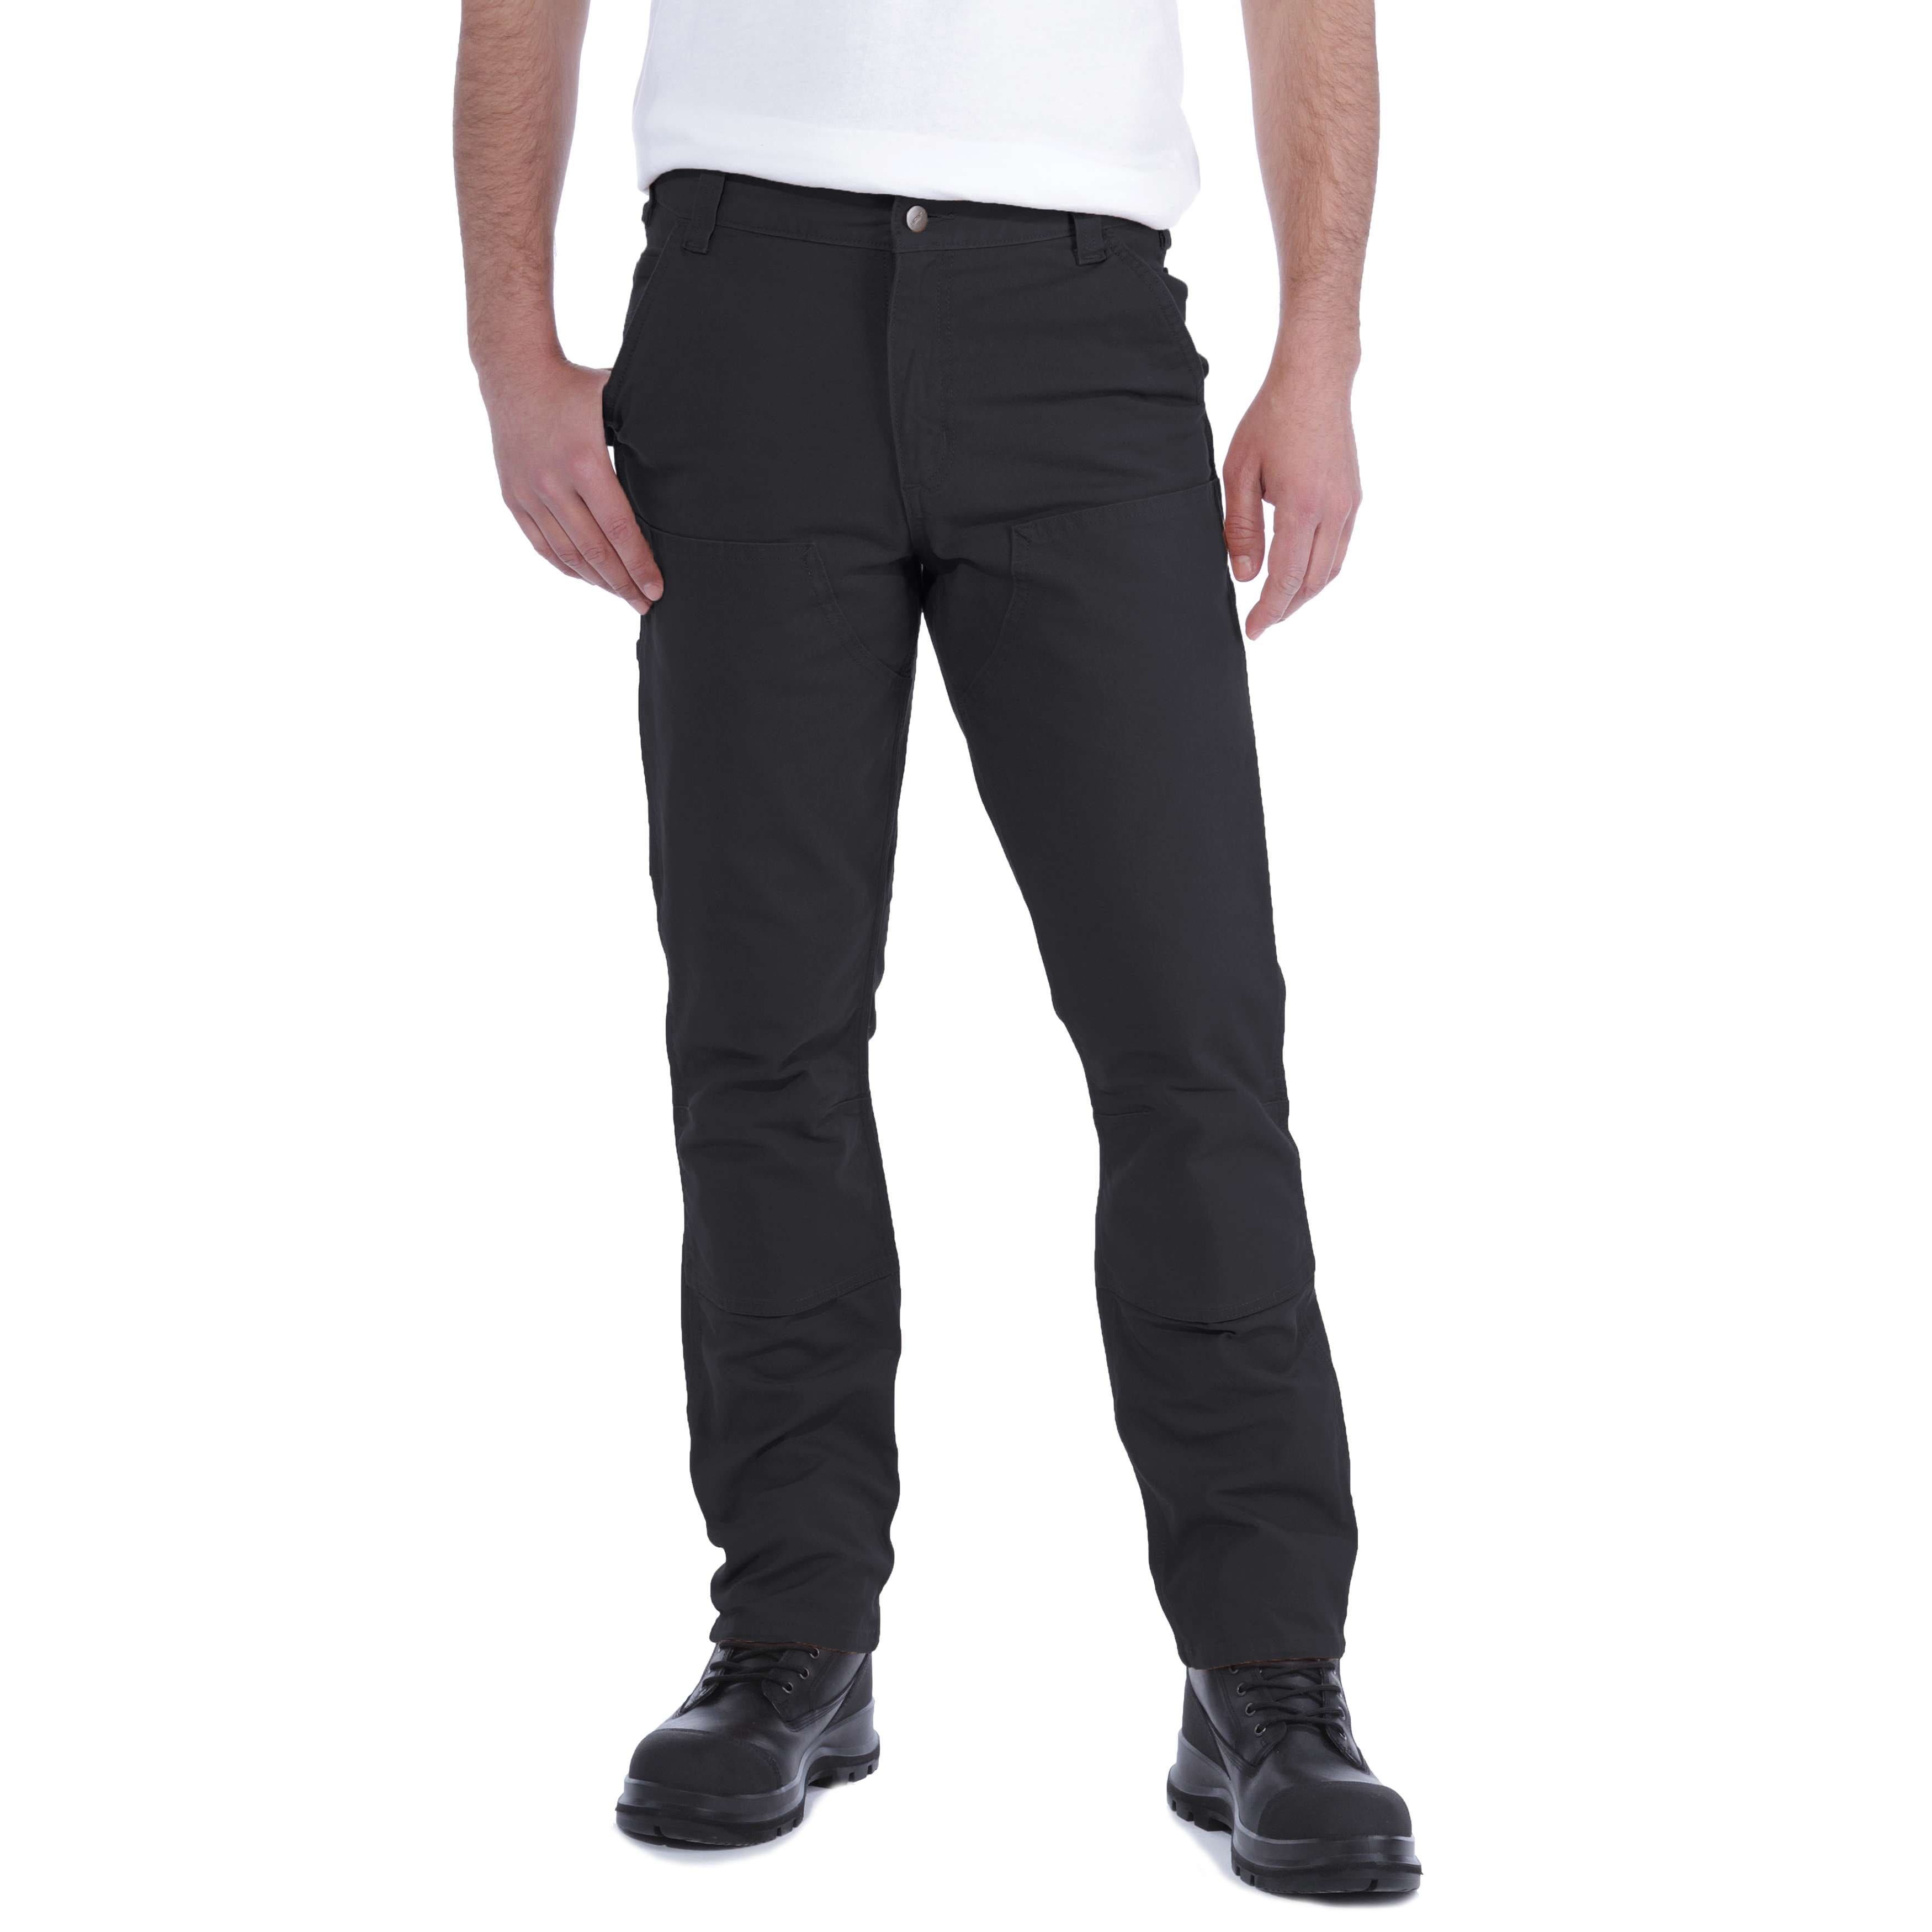 RUGGED FLEX™ STRAIGHT FIT DUCK DOUBLE-FRONT UTILITY WORK PANT